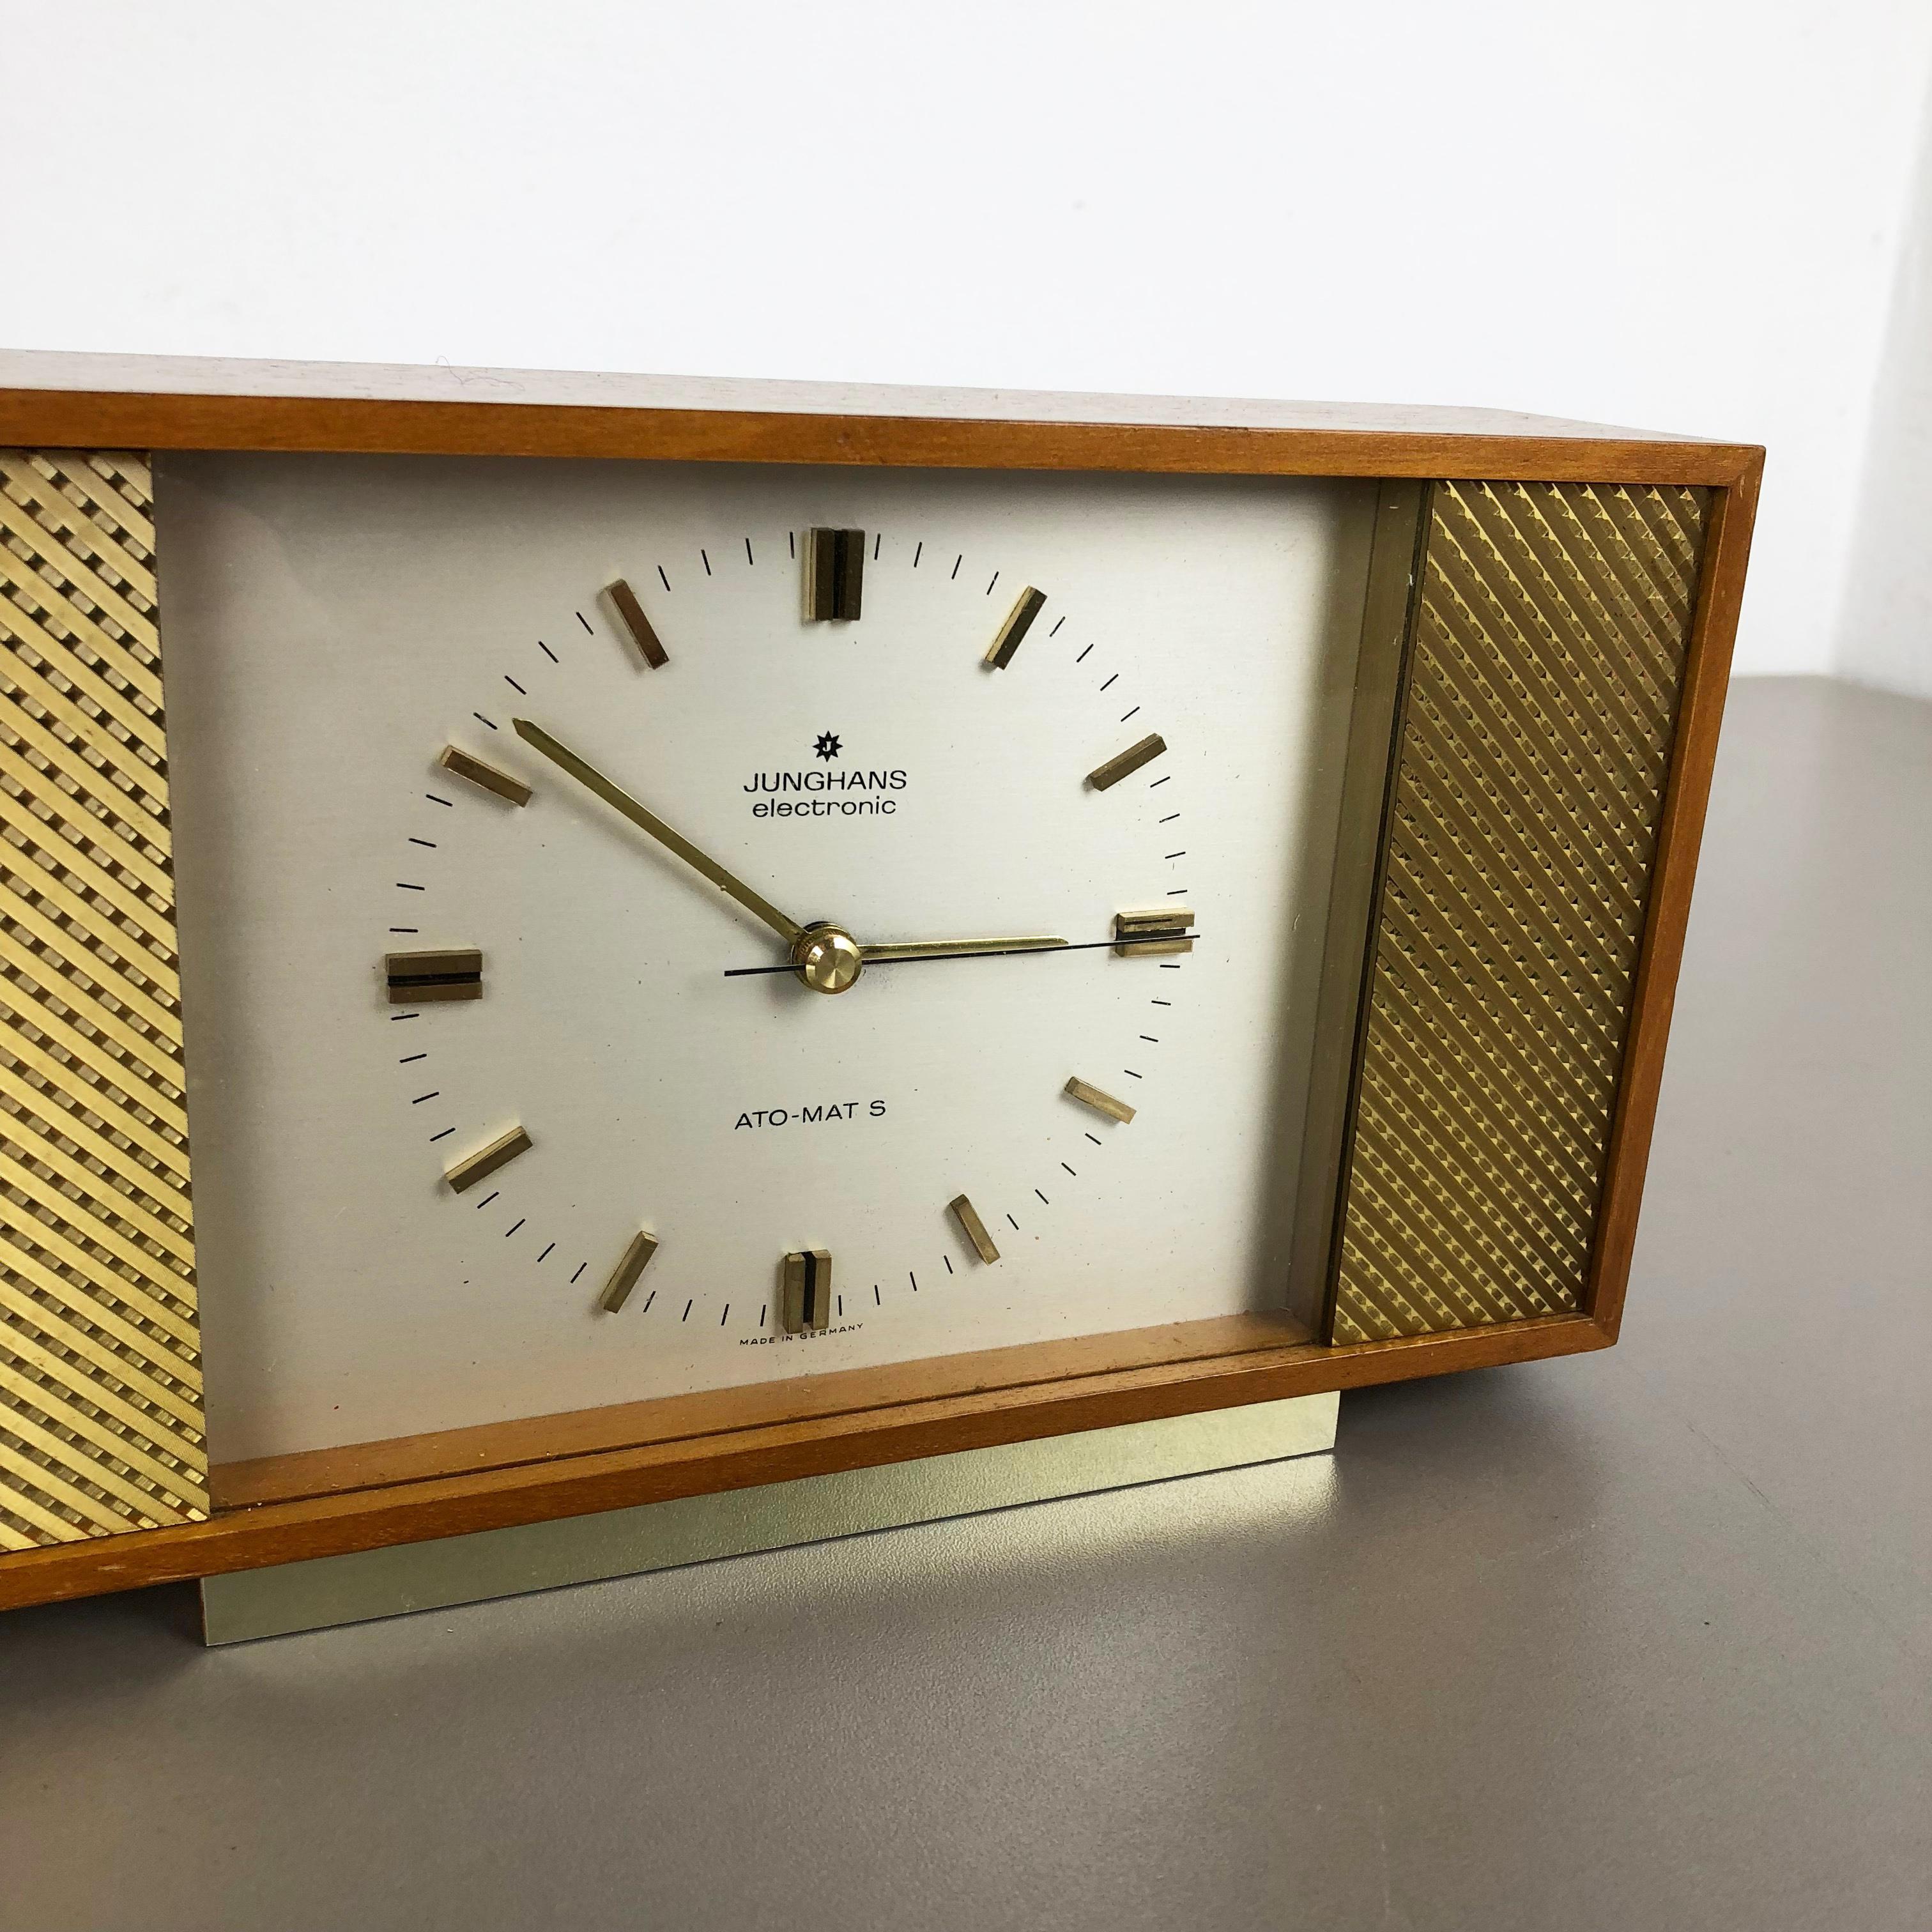 20th Century Vintage 1960s Modernist Wooden Teak Table Clock by Junghans Electronic, Germany